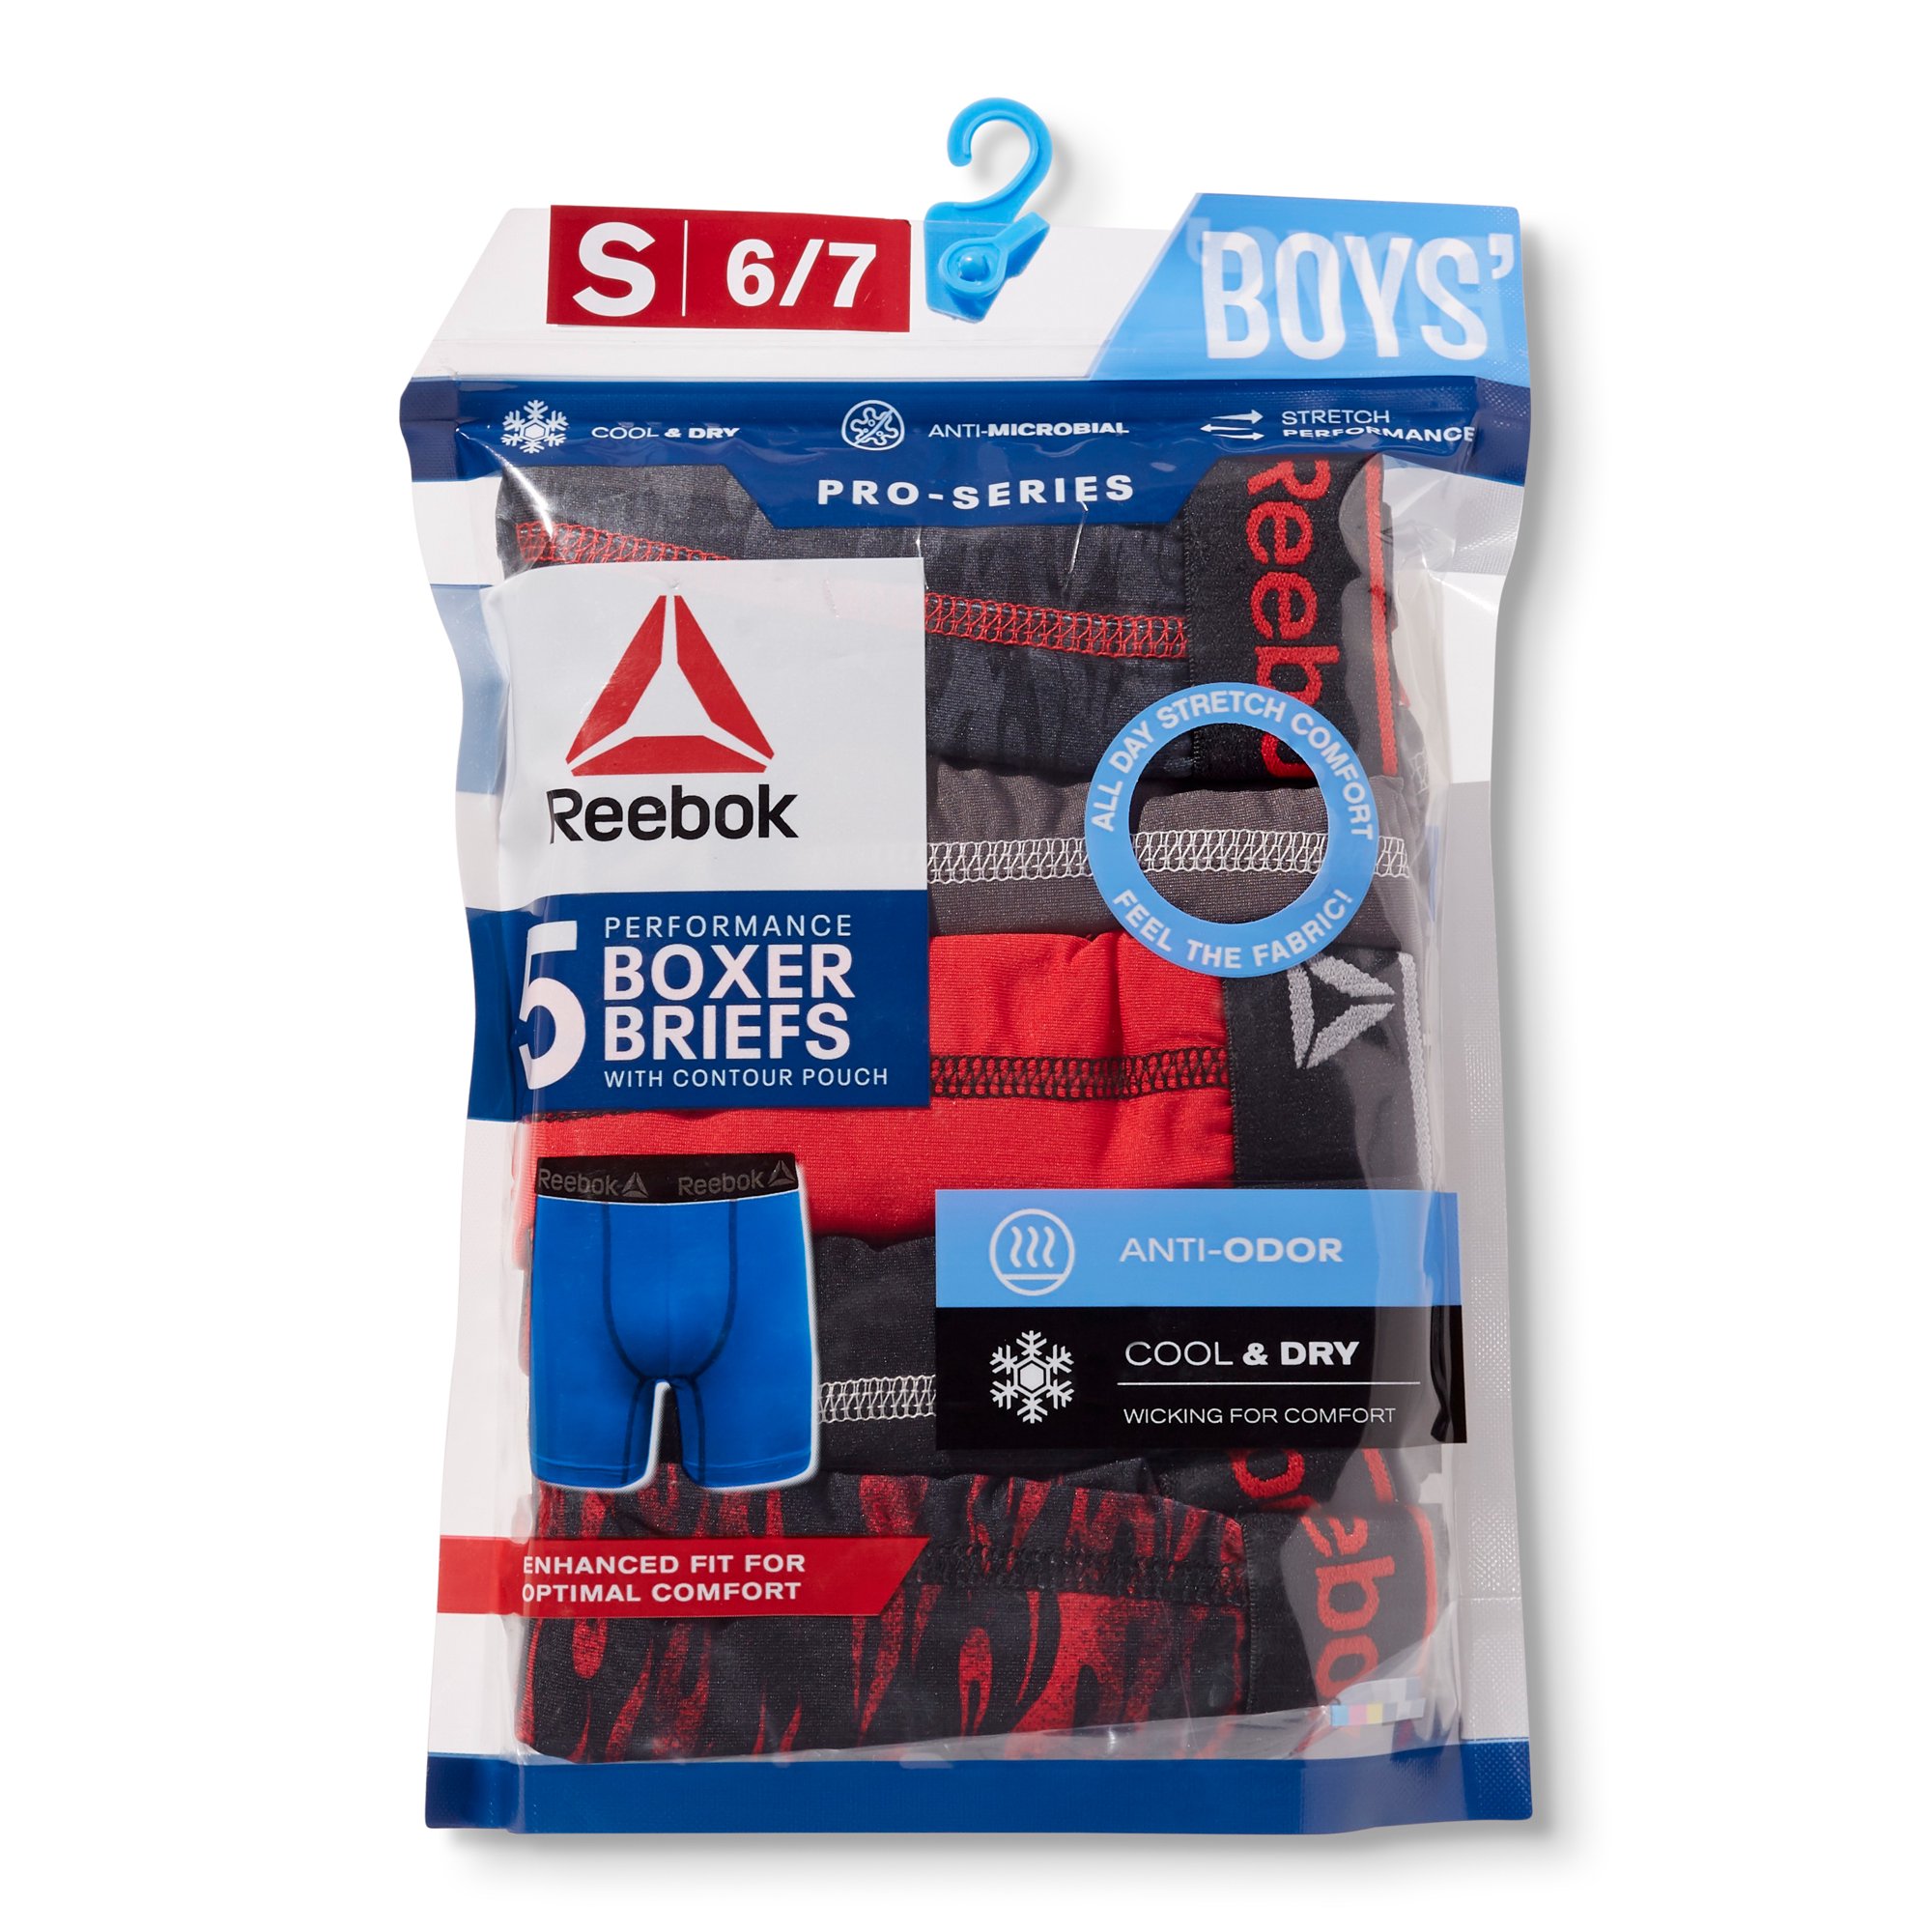 Reebok Boys' Performance Boxer Briefs, 5 Pack, Sizes S-XL - image 3 of 6